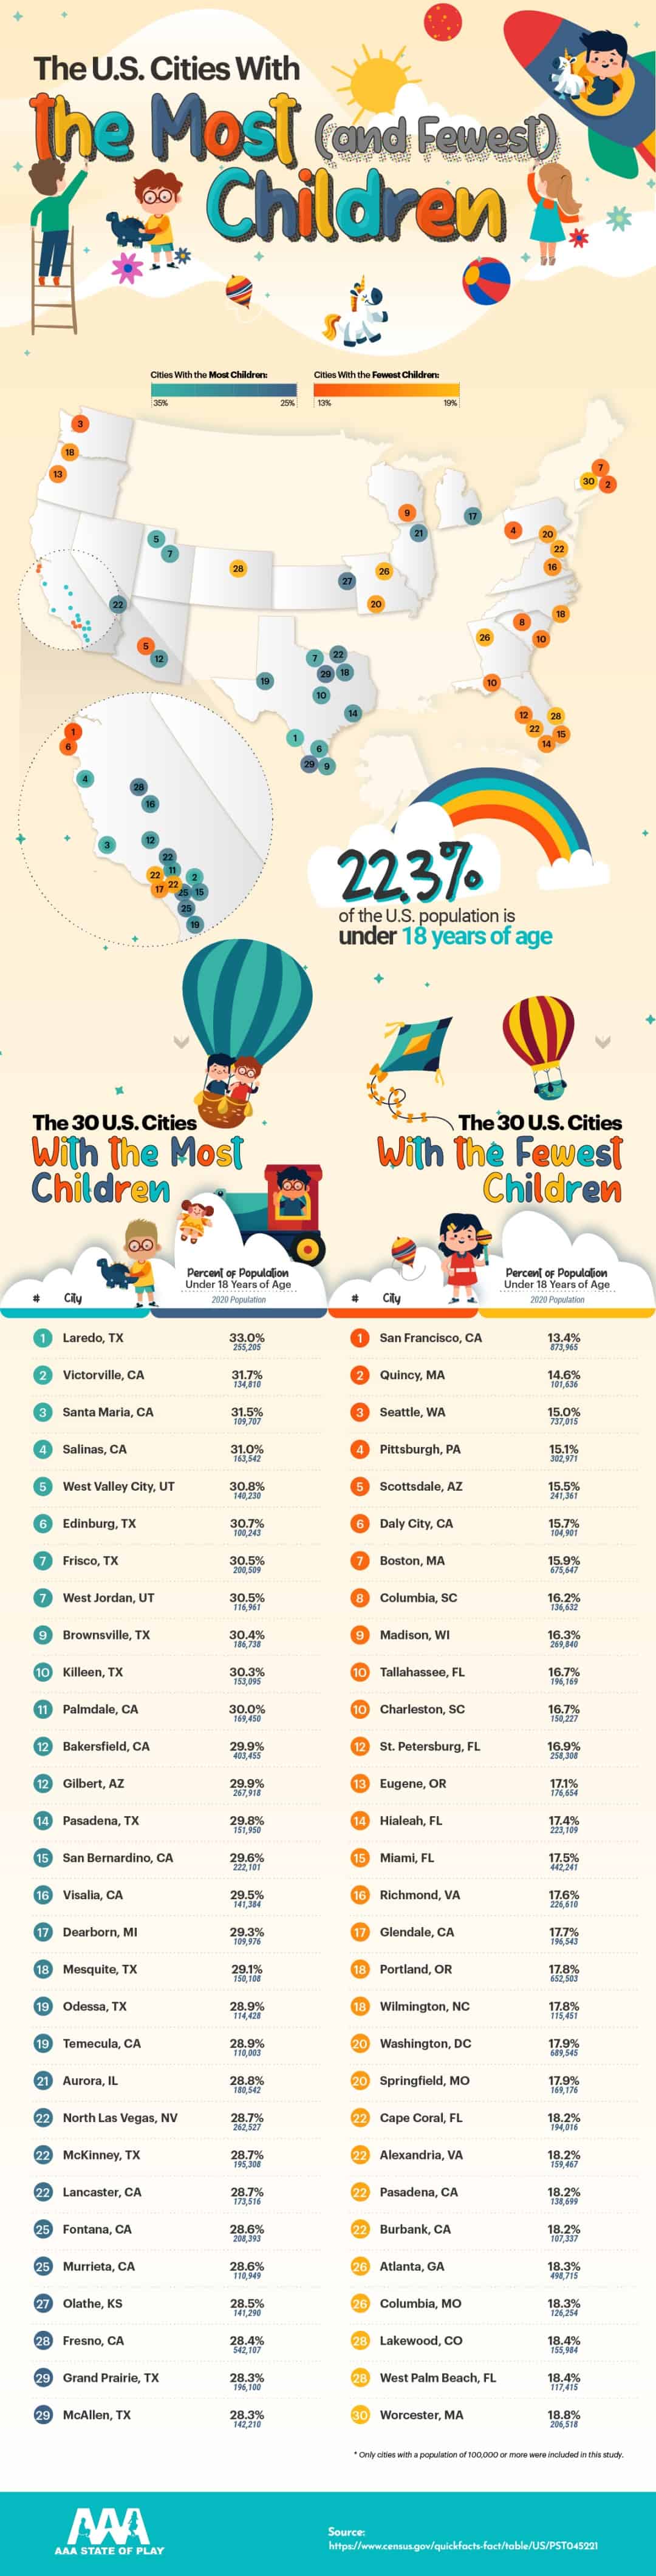 The U.S. Cities With the Most (and Fewest) Children as a Percentage of the Population